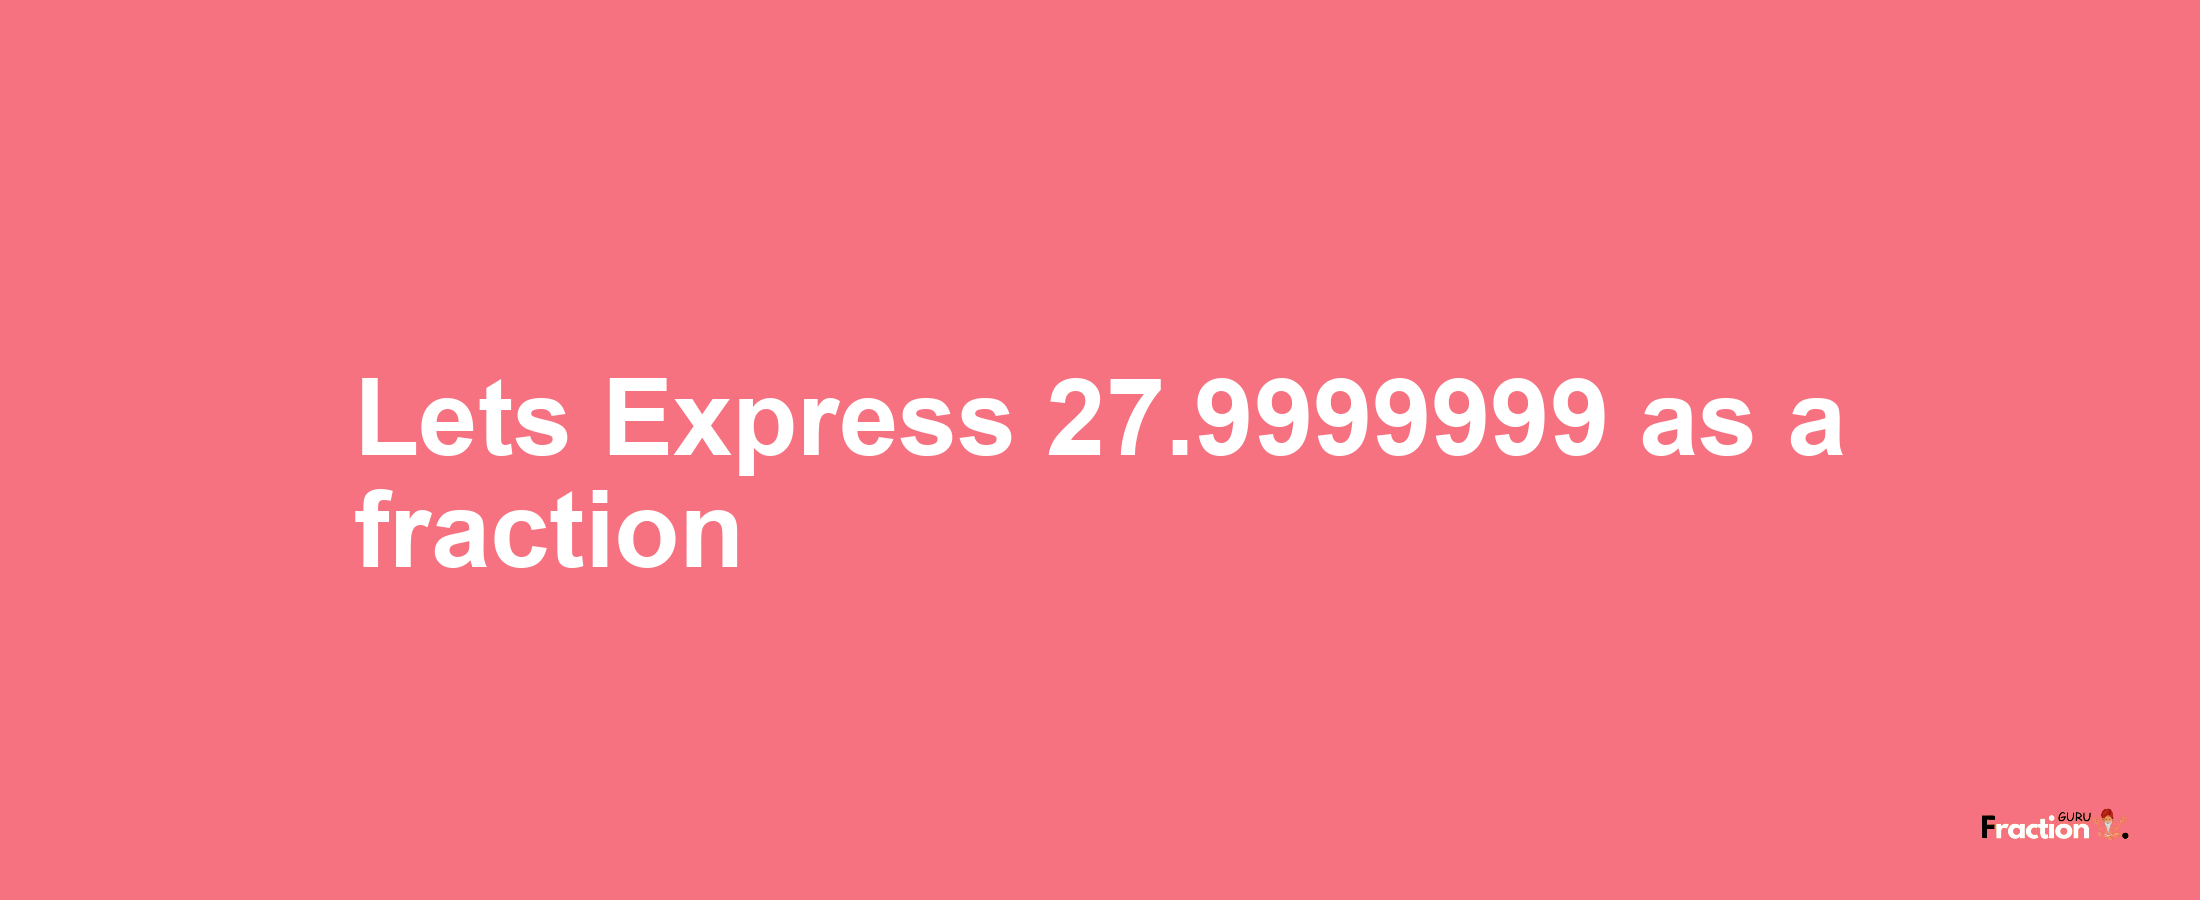 Lets Express 27.9999999 as afraction